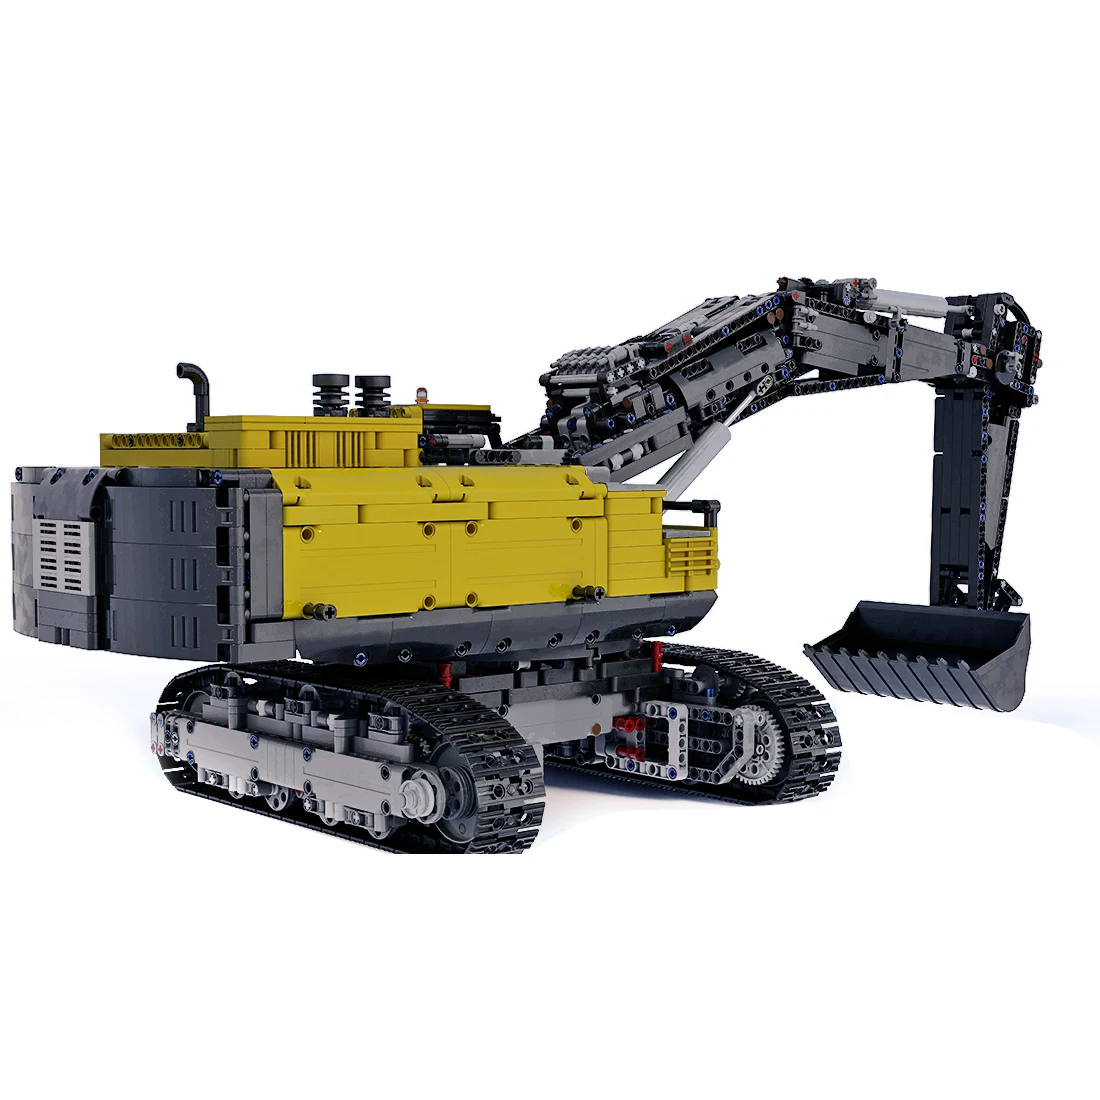 3797+Pcs MOC-43636 Engineering Series Excavator Particle Building Block (Licensed and Designed by Flybum60)